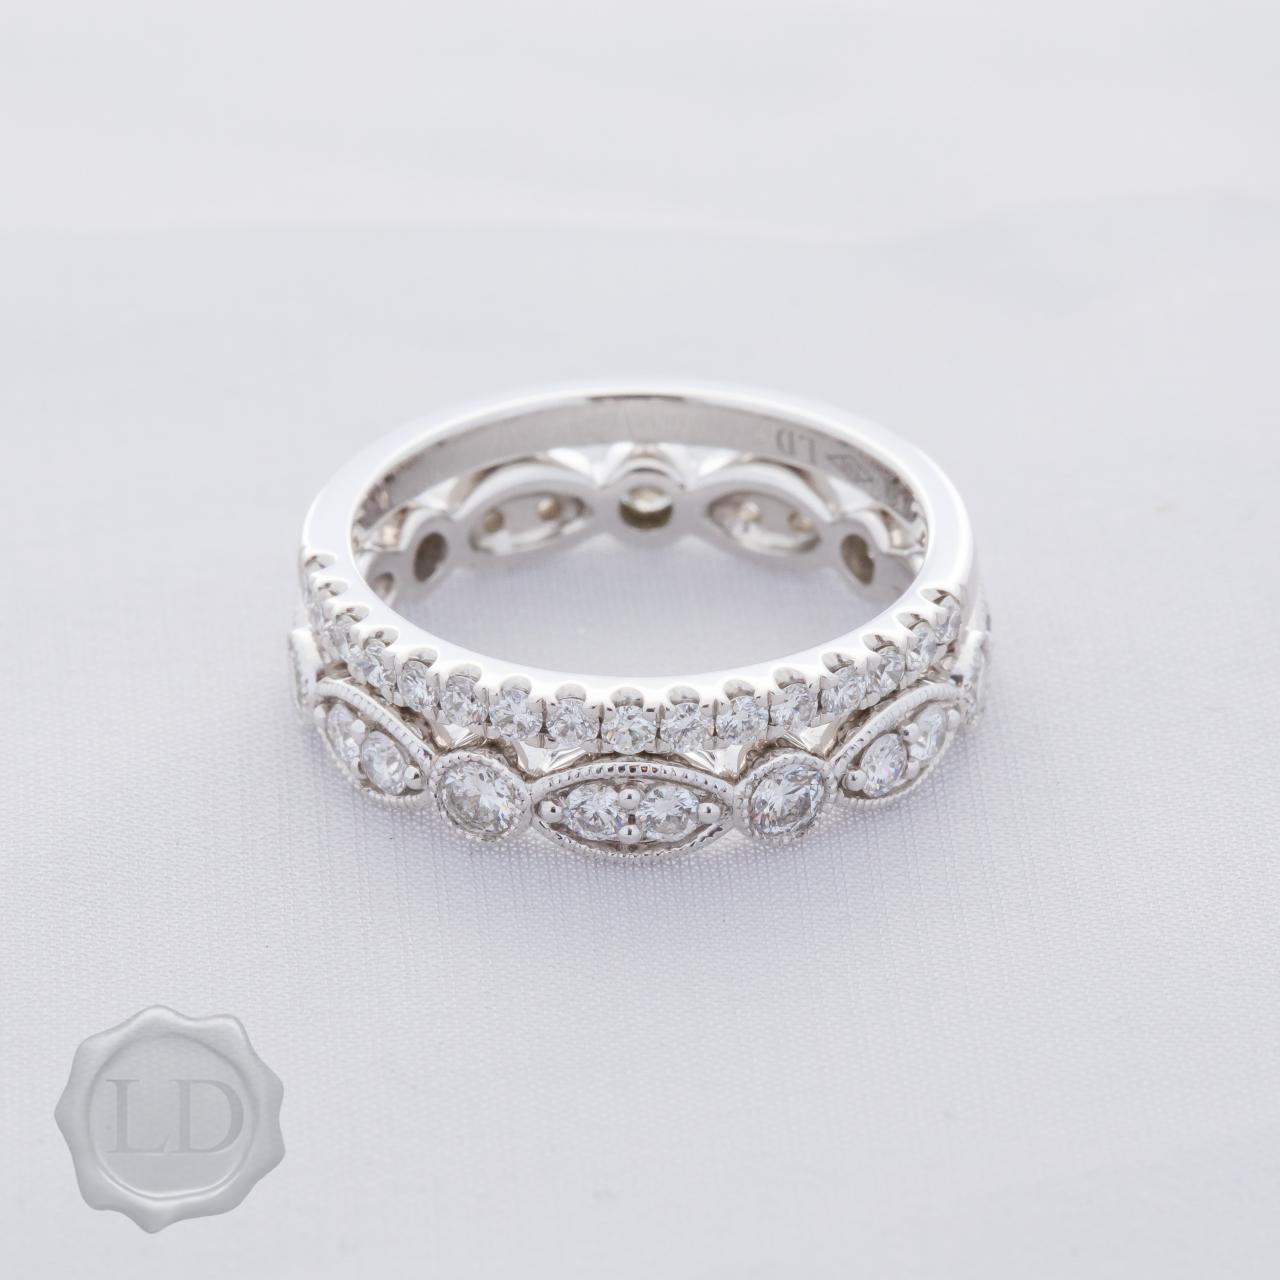 Lovely LD diamond wedding band in 18ct white gold, size M